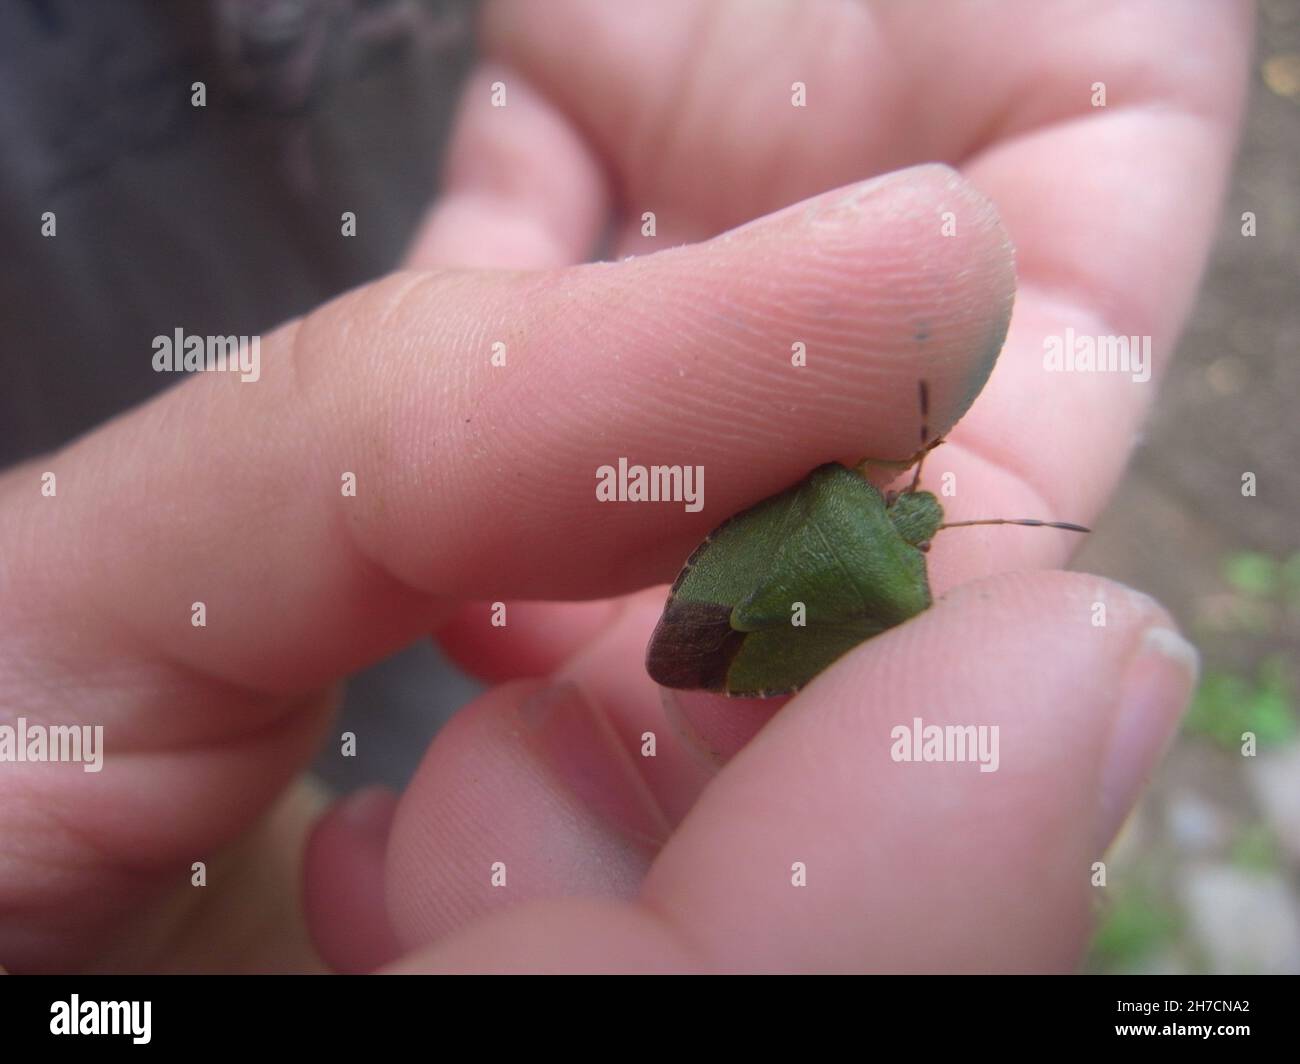 Green shield bug, Common green shield bug (Palomena prasina), between two fingers, view from above, Germany Stock Photo